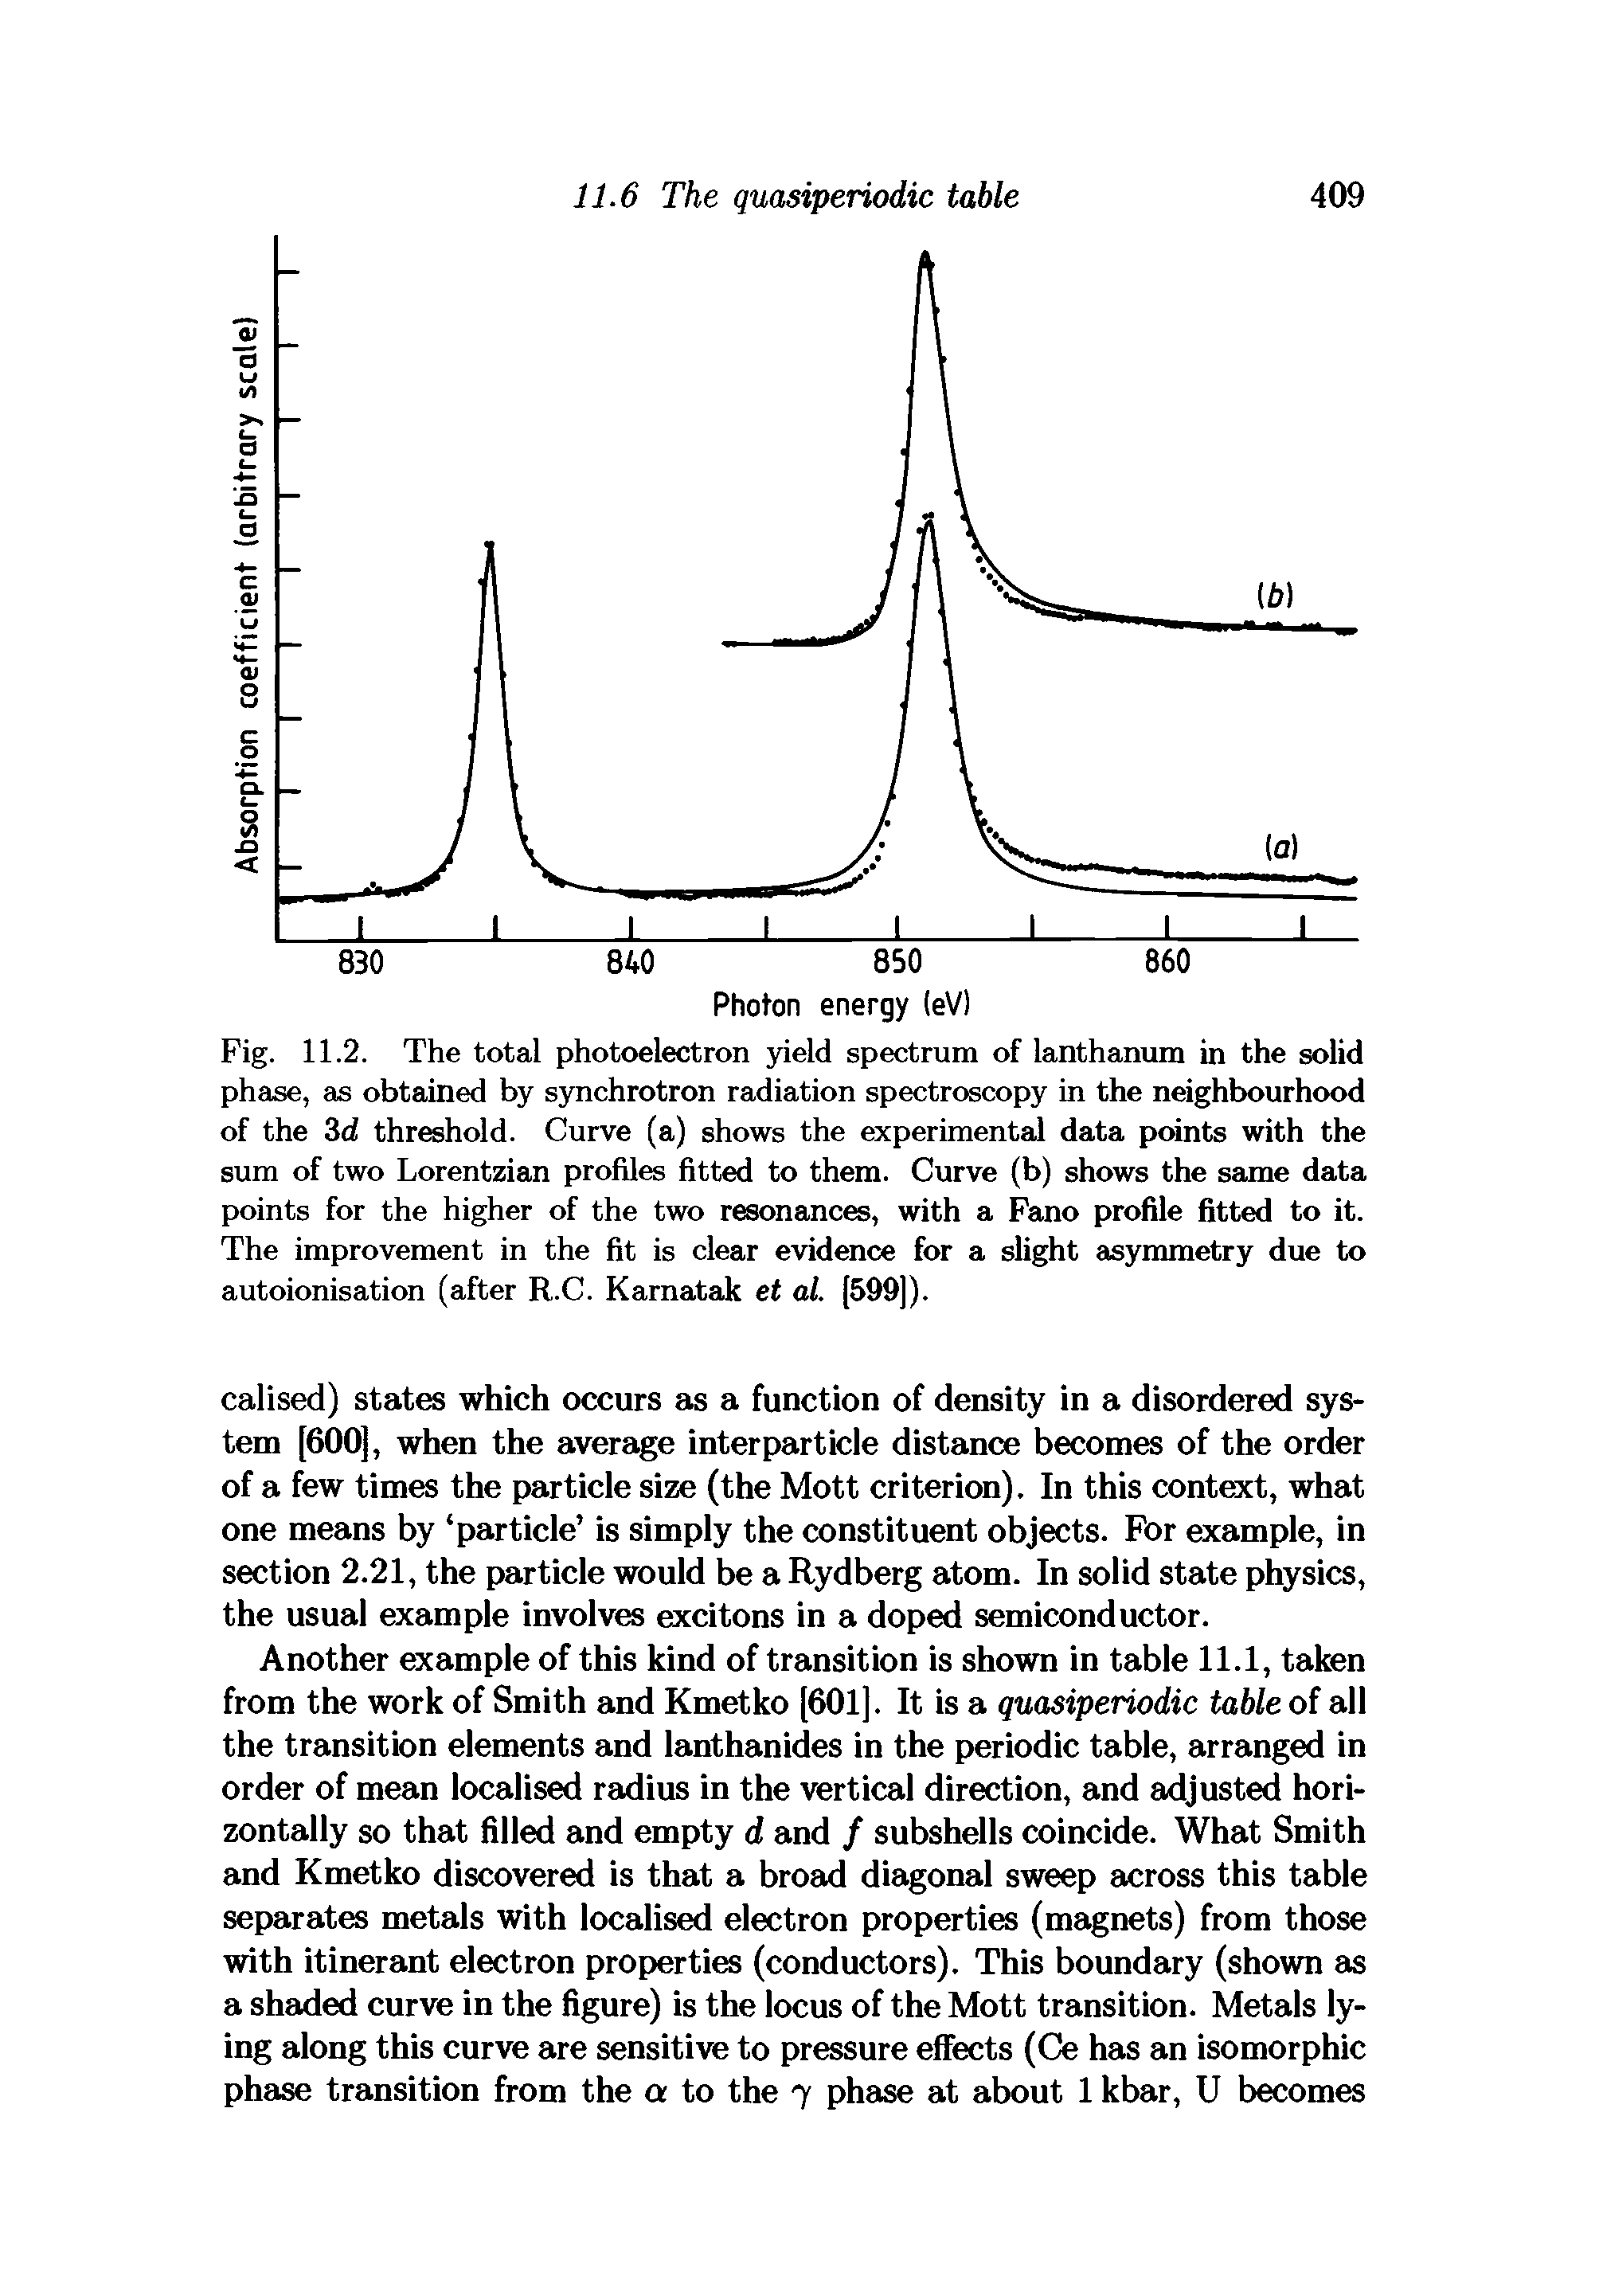 Fig. 11.2. The total photoelectron yield spectrum of lanthanum in the solid phase, as obtained by synchrotron radiation spectroscopy in the neighbourhood of the 3d threshold. Curve (a) shows the experimental data points with the sum of two Lorentzian profiles fitted to them. Curve (b) shows the same data points for the higher of the two resonances, with a Fano profile fitted to it. The improvement in the fit is clear evidence for a slight asymmetry due to autoionisation (after R.C. Karnatak et al. [599]).